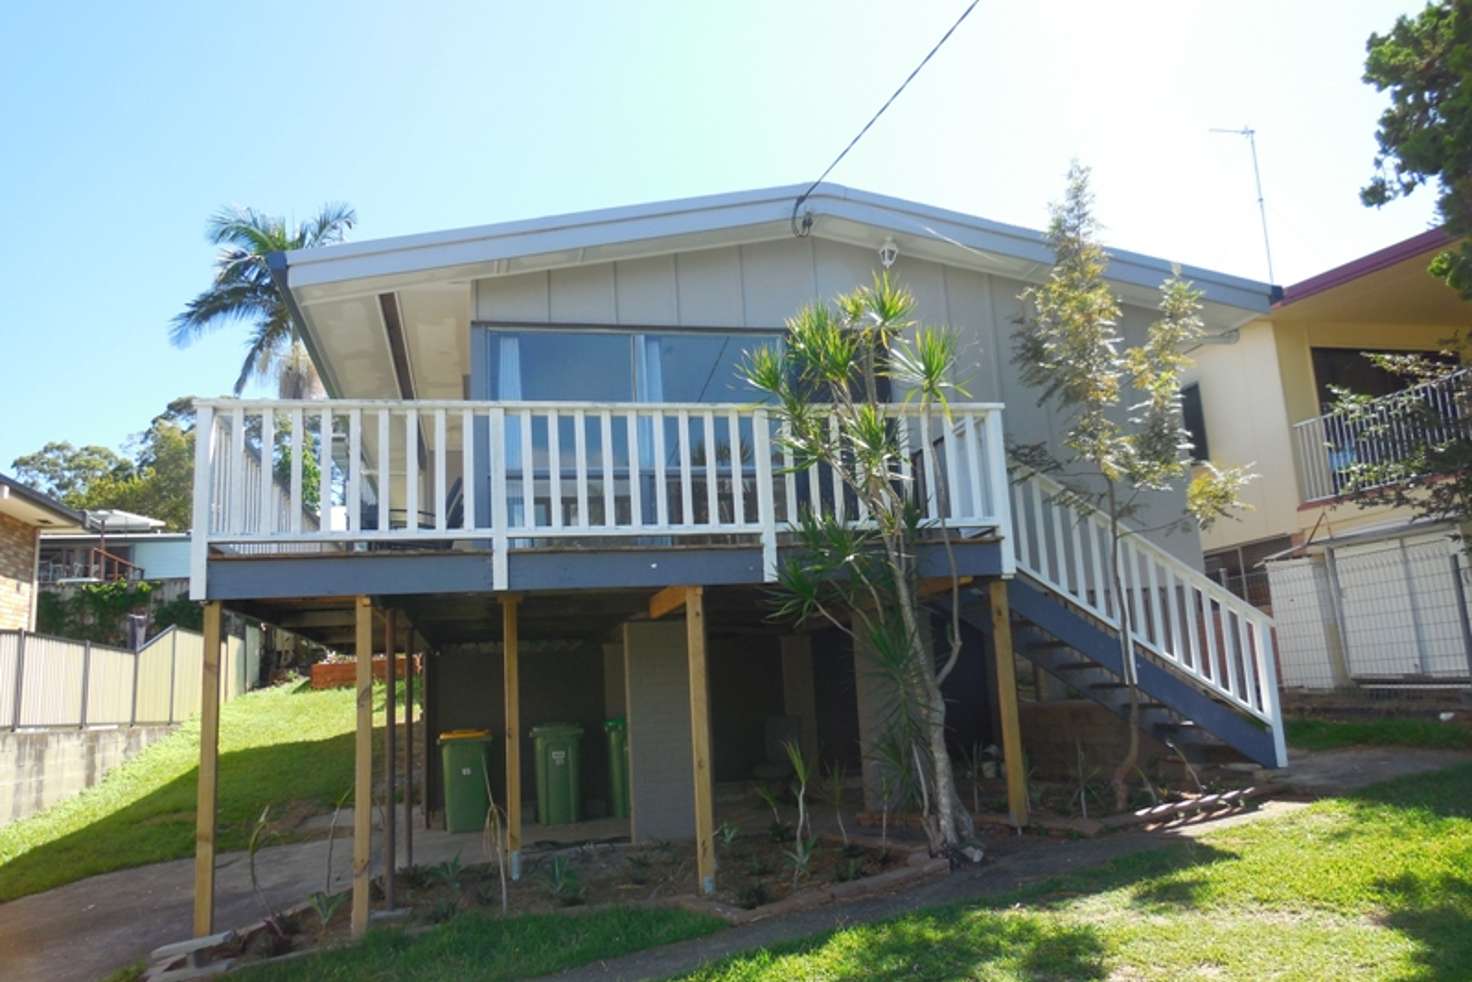 Main view of Homely house listing, 95 Tabilban St, Burleigh Heads QLD 4220